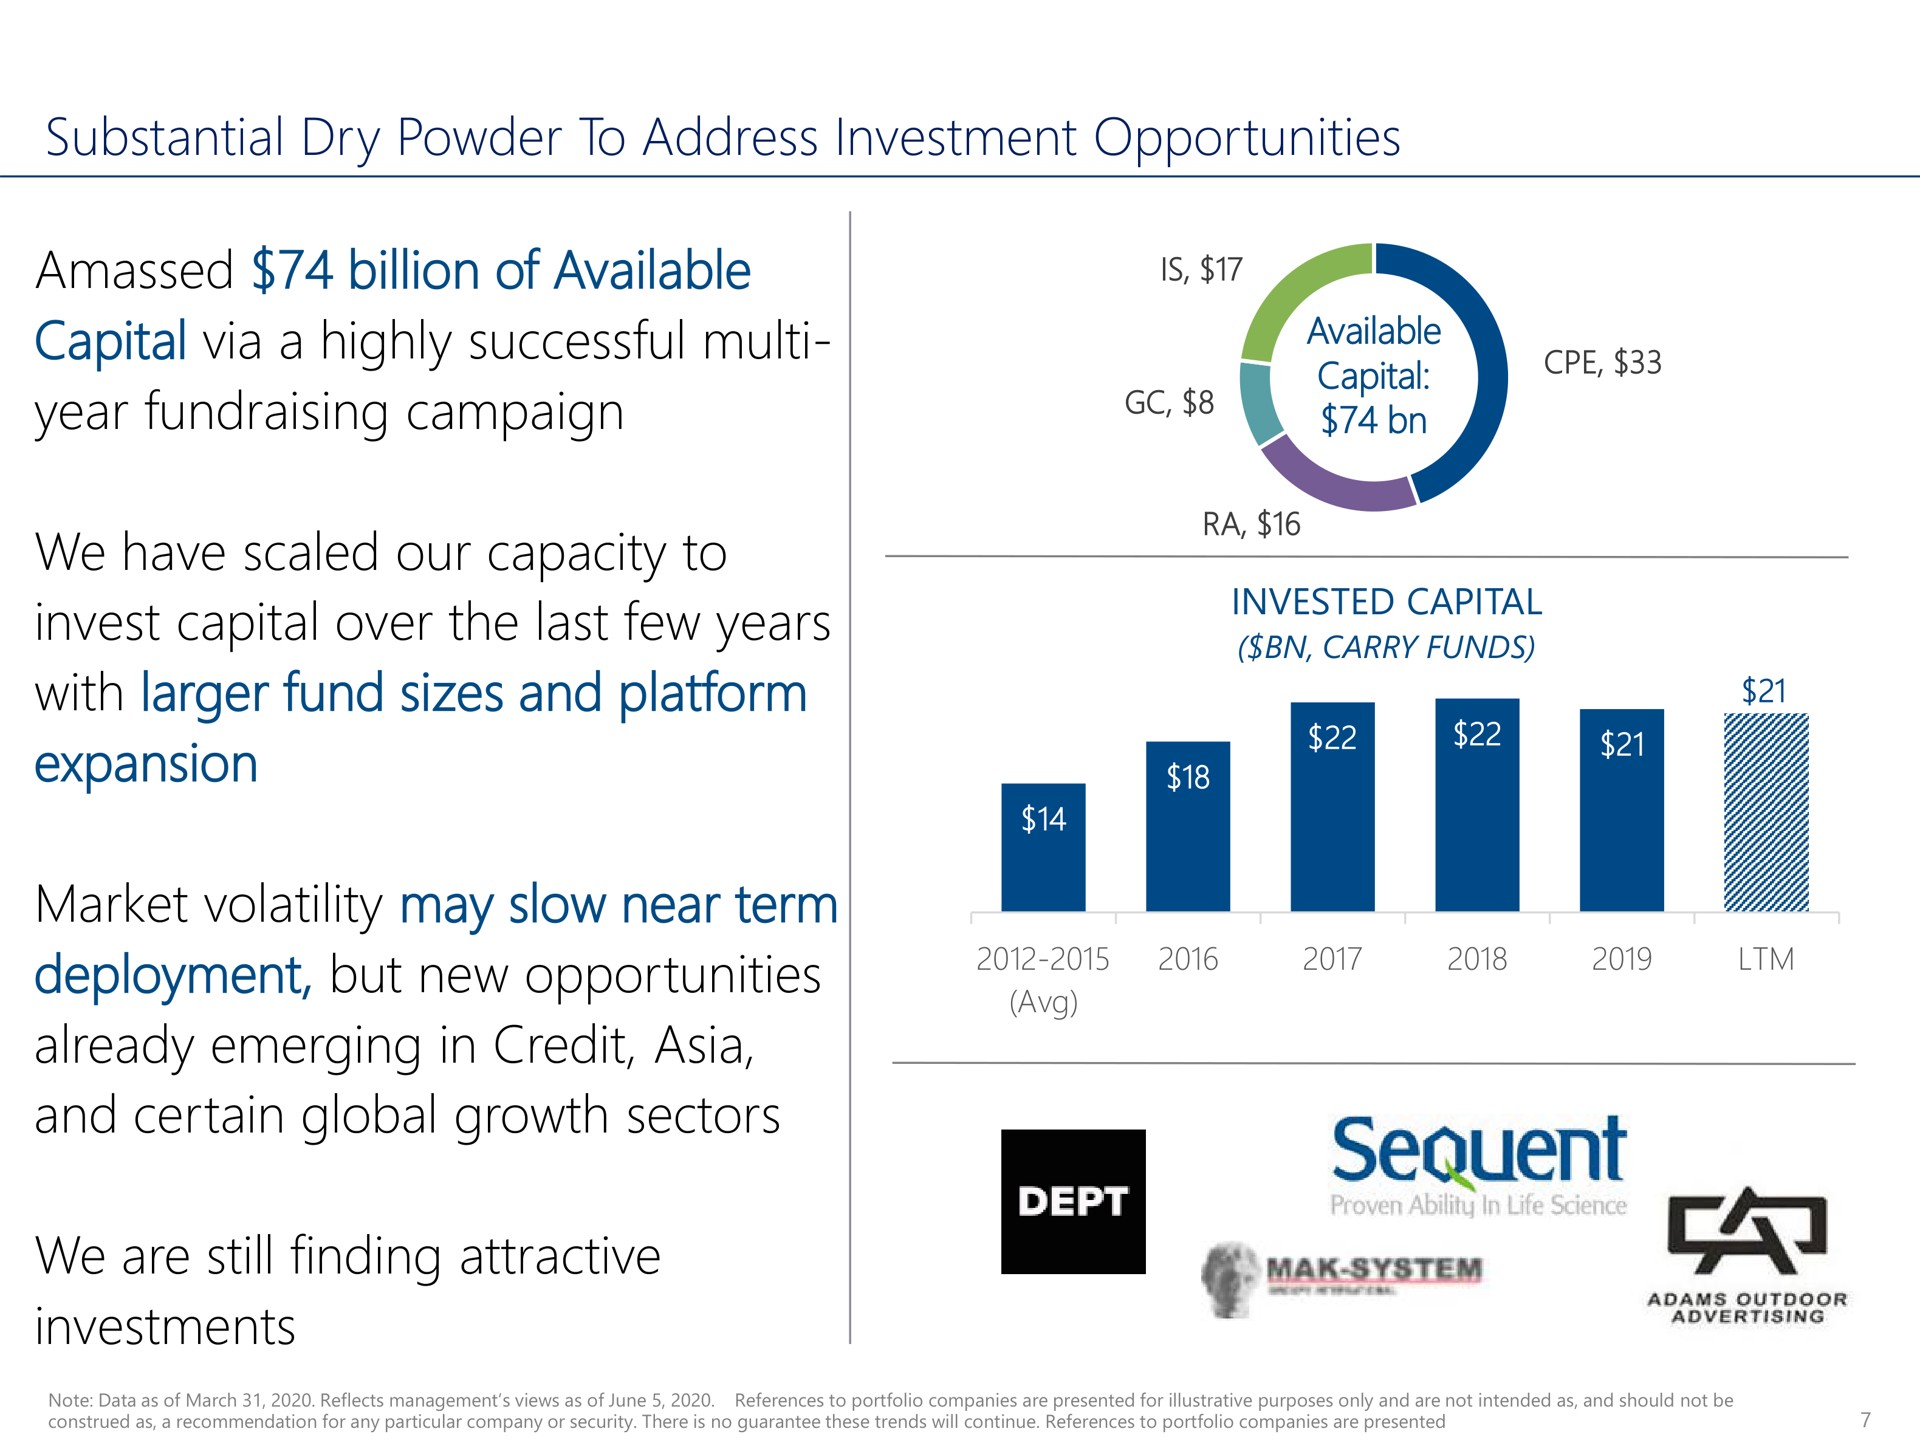 substantial dry powder to address investment opportunities amassed billion of available capital via a highly successful year campaign we have scaled our capacity to invest capital over the last few years with fund sizes and platform expansion market volatility may slow near term deployment but new opportunities already emerging in credit and certain global growth sectors we are still finding attractive investments | Carlyle